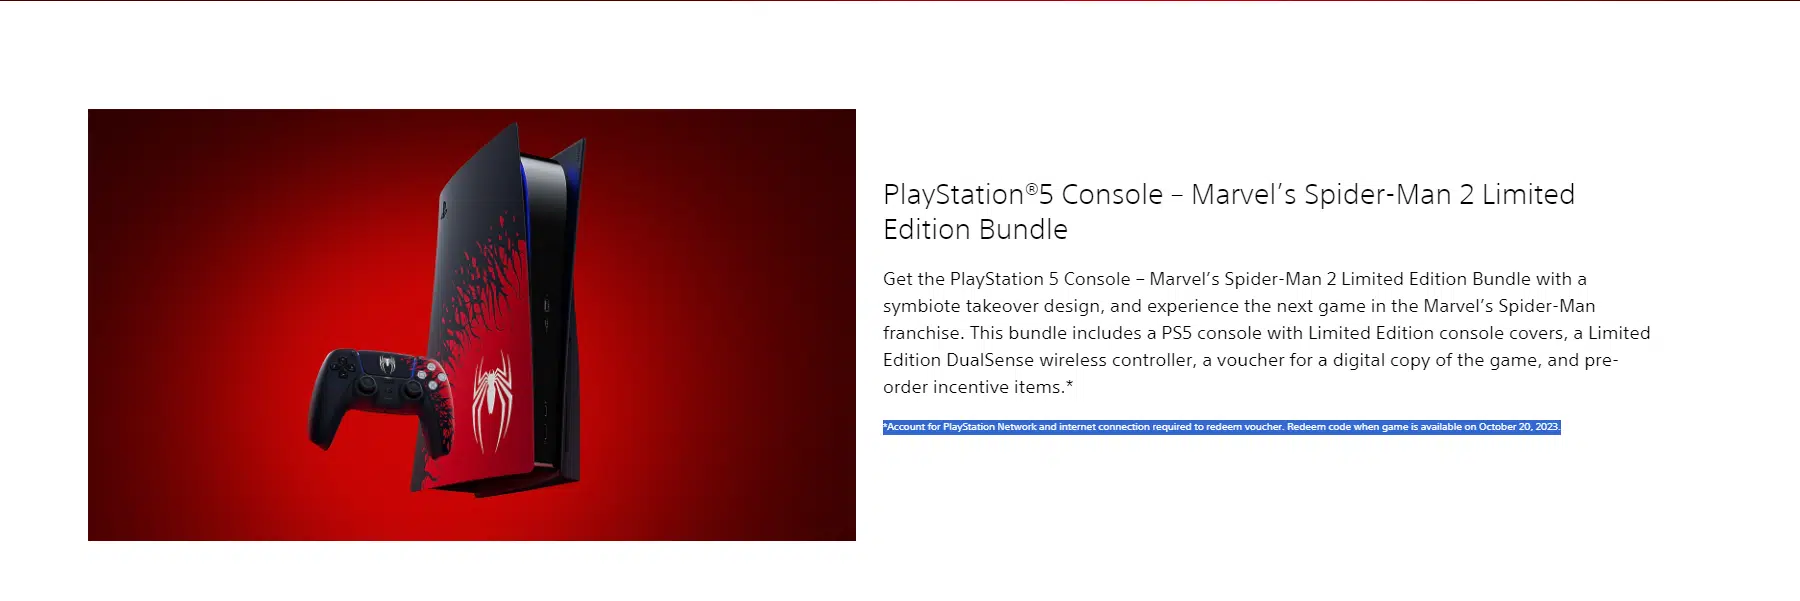 Marvel's Spider-Man 2 PlayStation 5 Bundle Code Will Be Redeemable October 20 Image